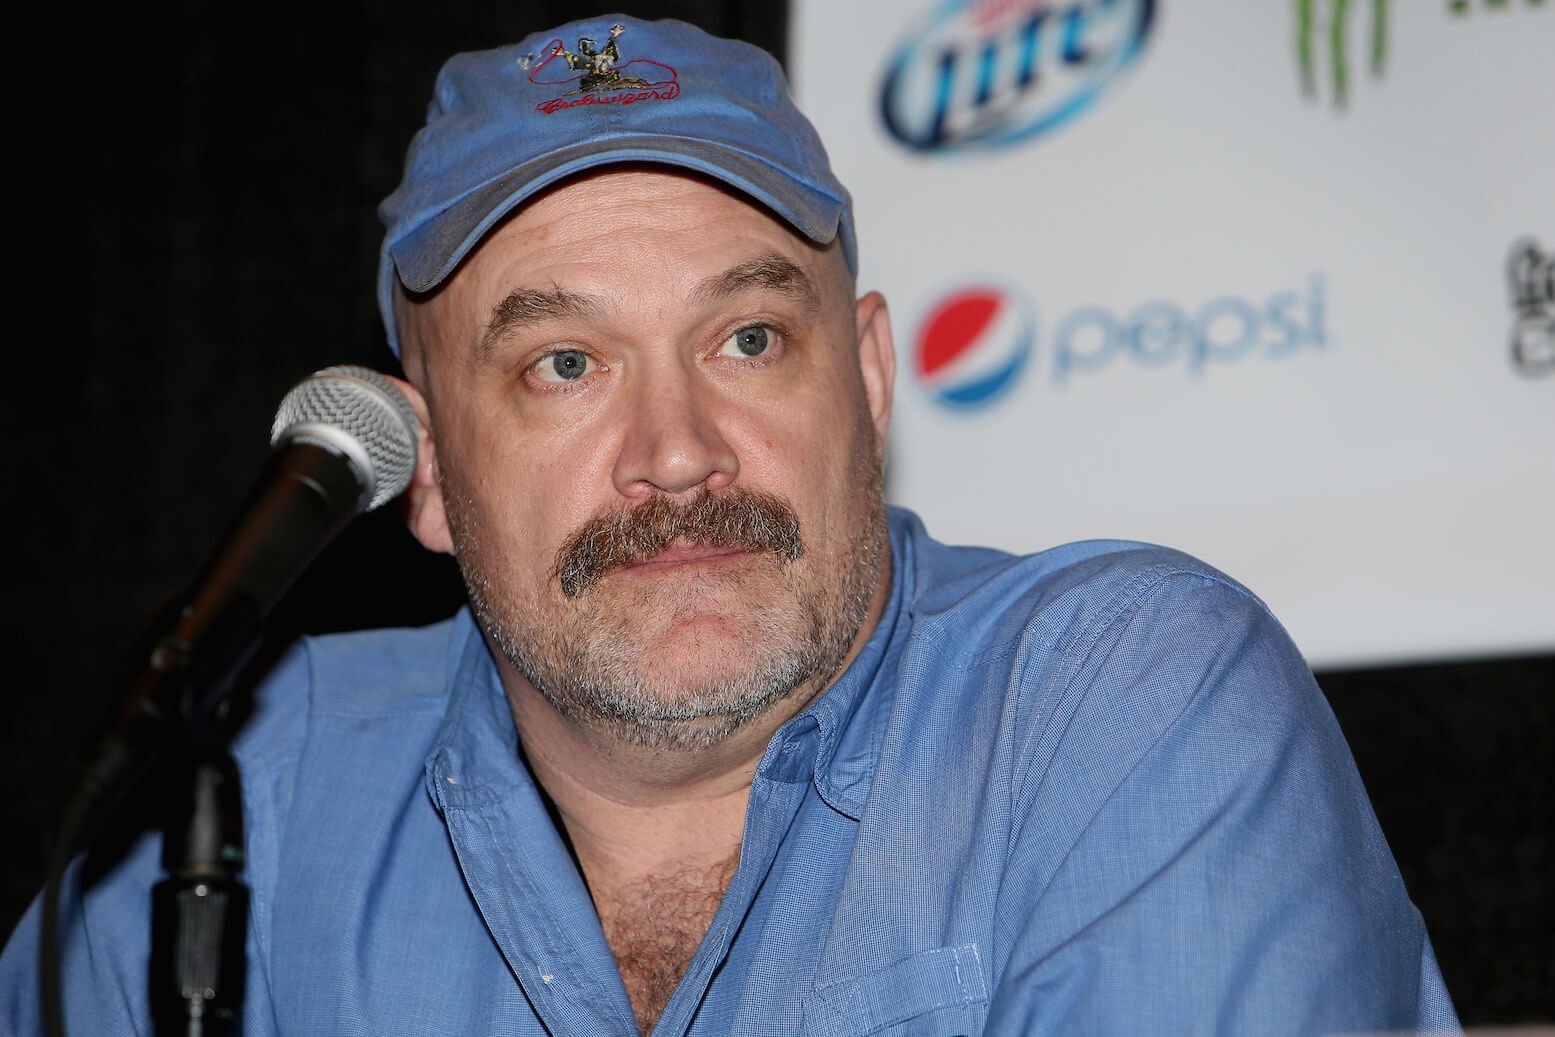 'Deadliest Catch' star Keith Colburn wearing a blue baseball cap and blue shirt at a conference